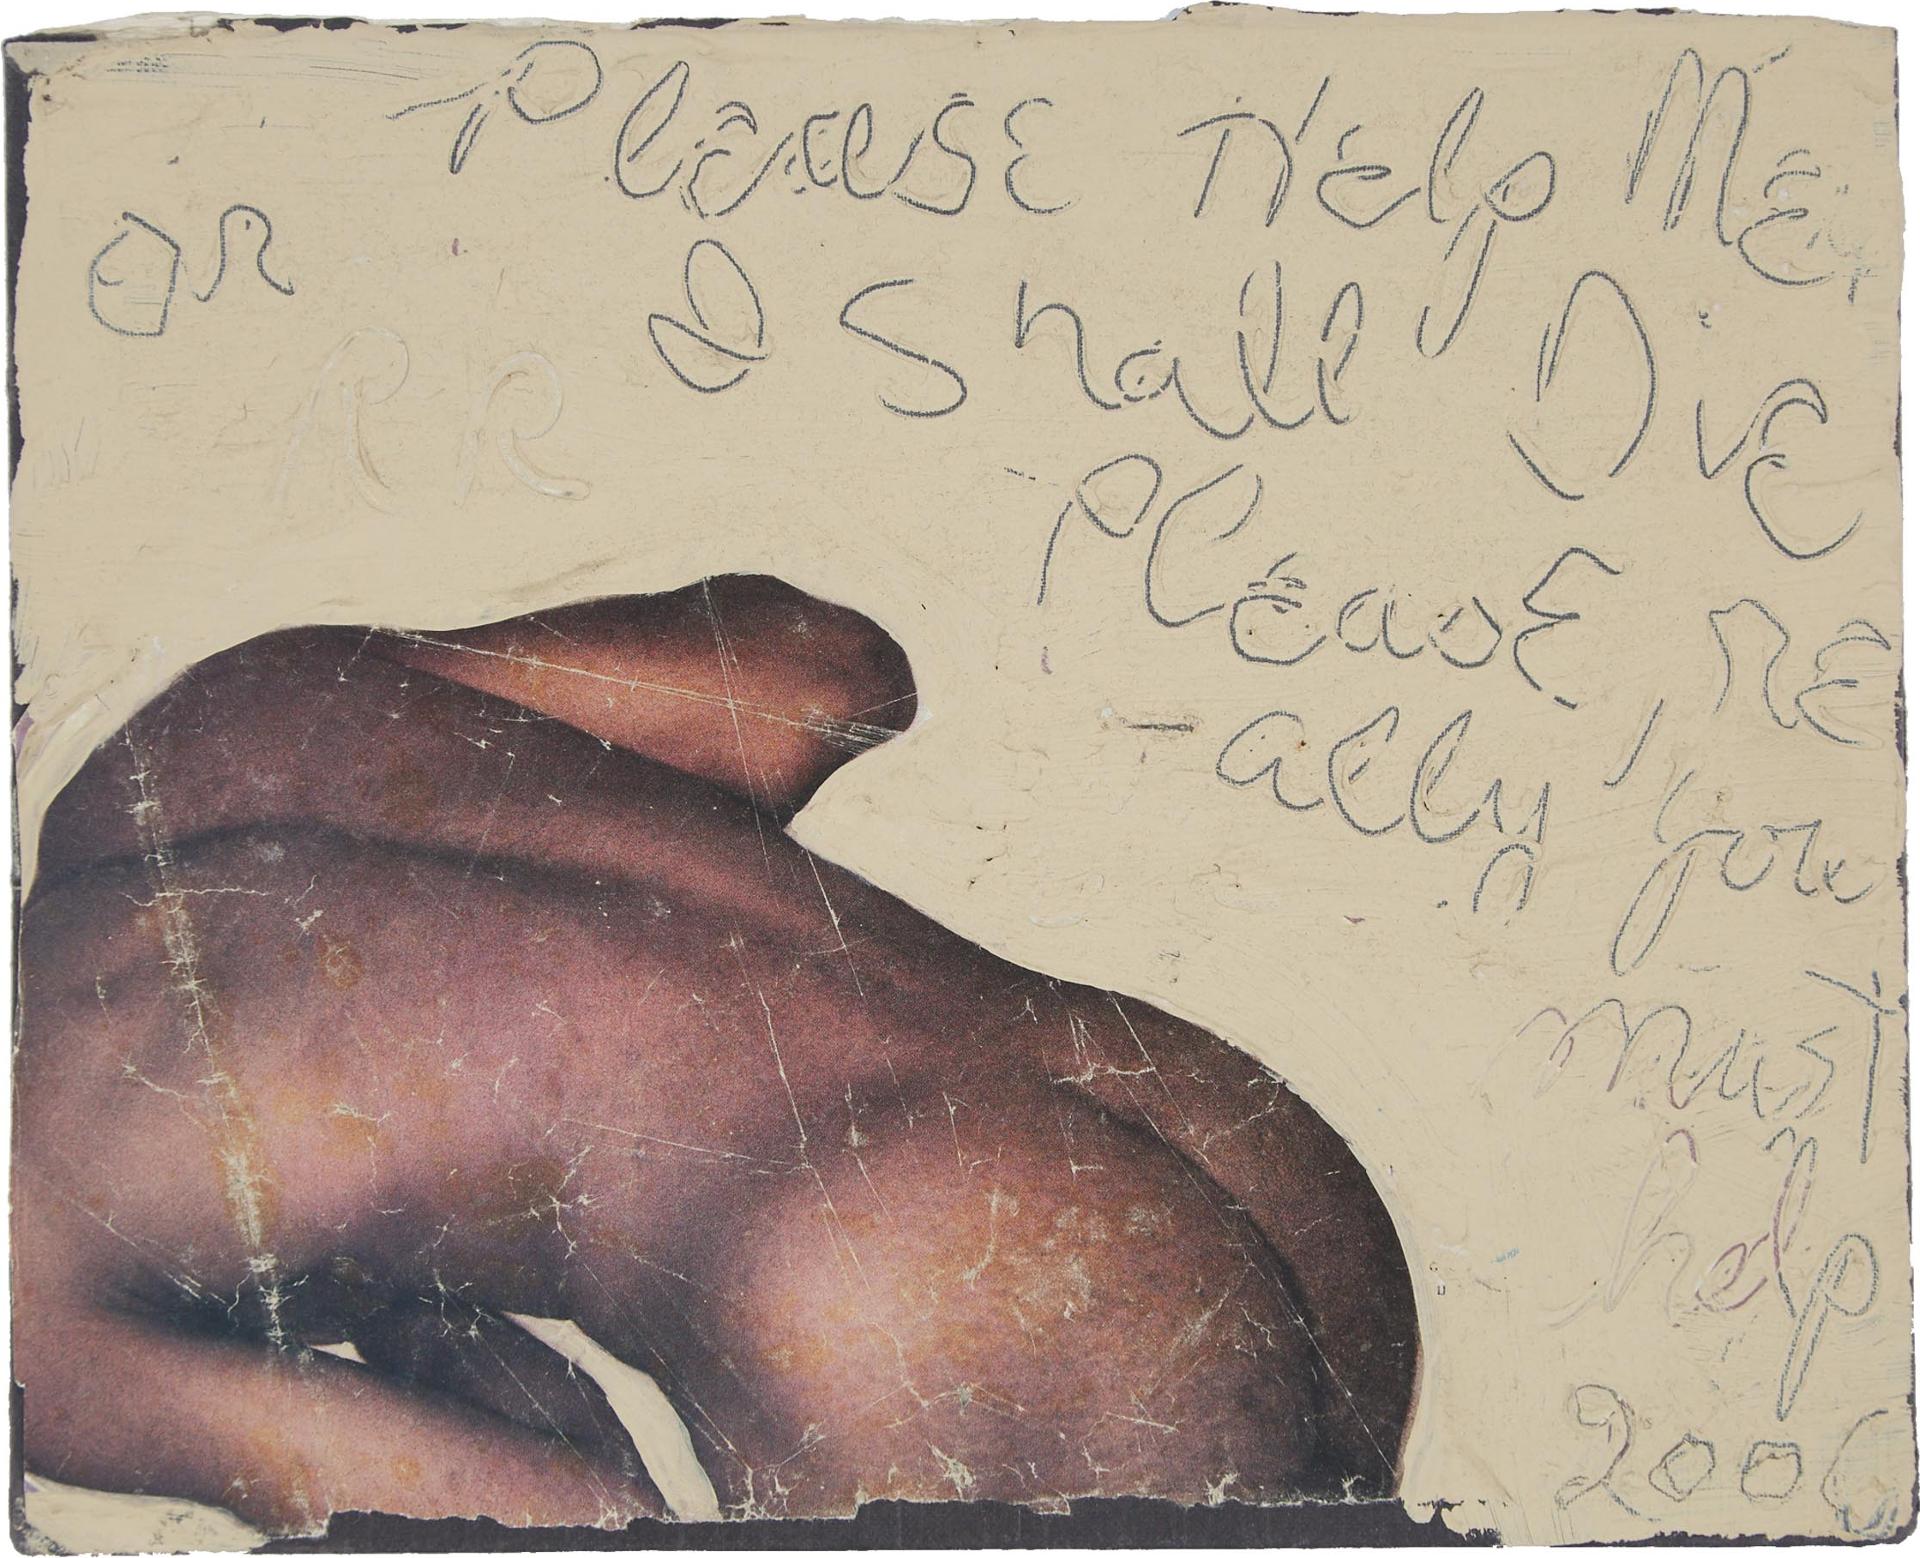 Rene Ricard (1946) - Please Help Me Or I Shall Die. Please Really You Must Help, 2006